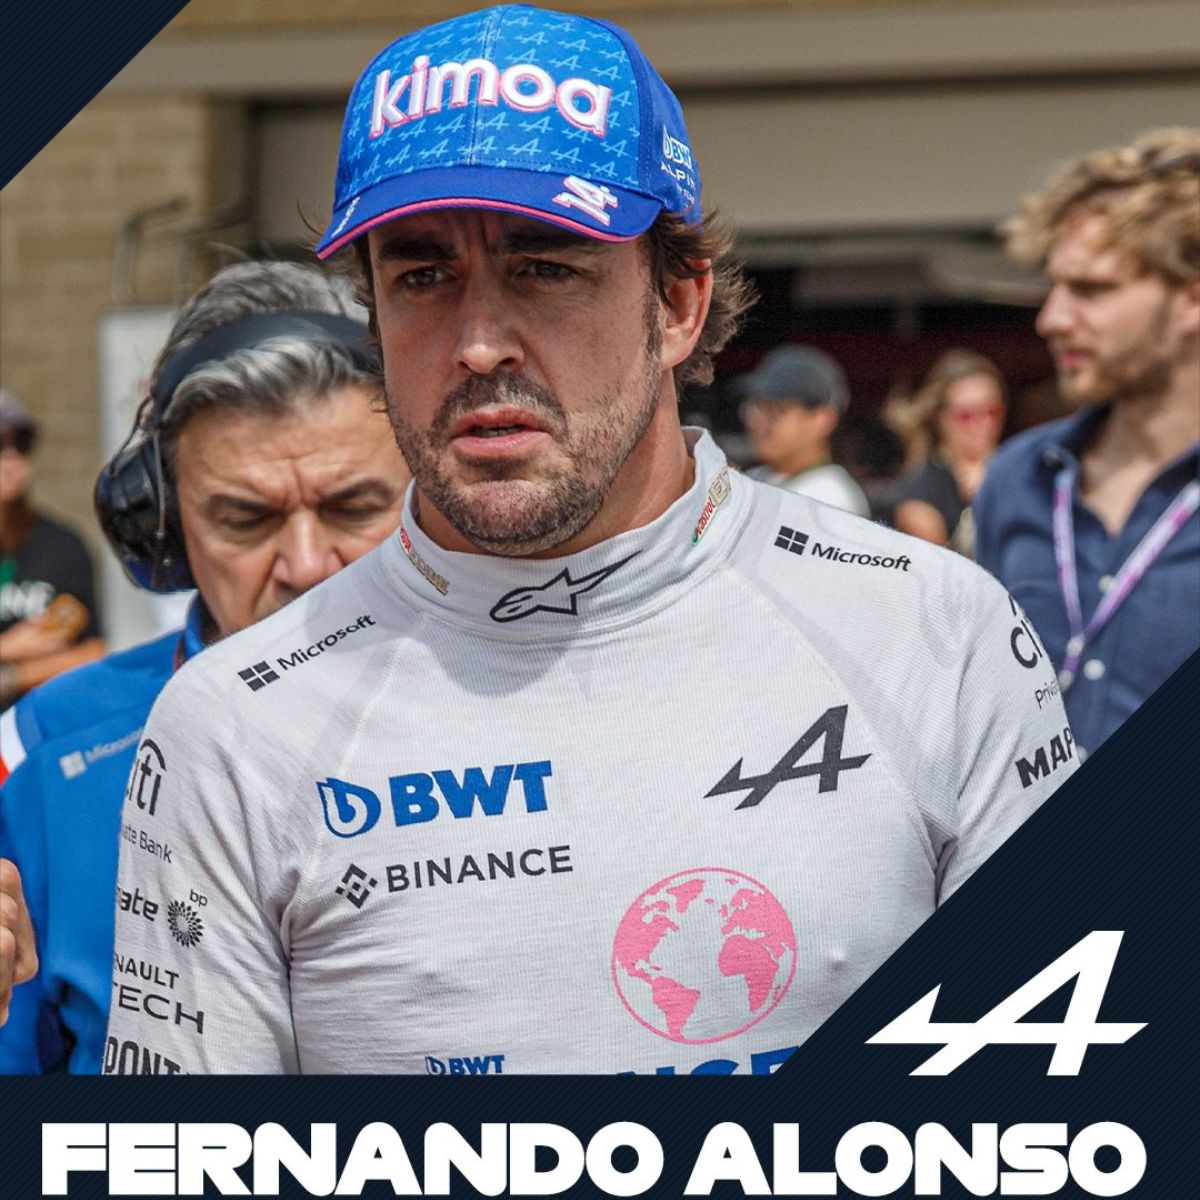 Fernando Alonso misses out on points